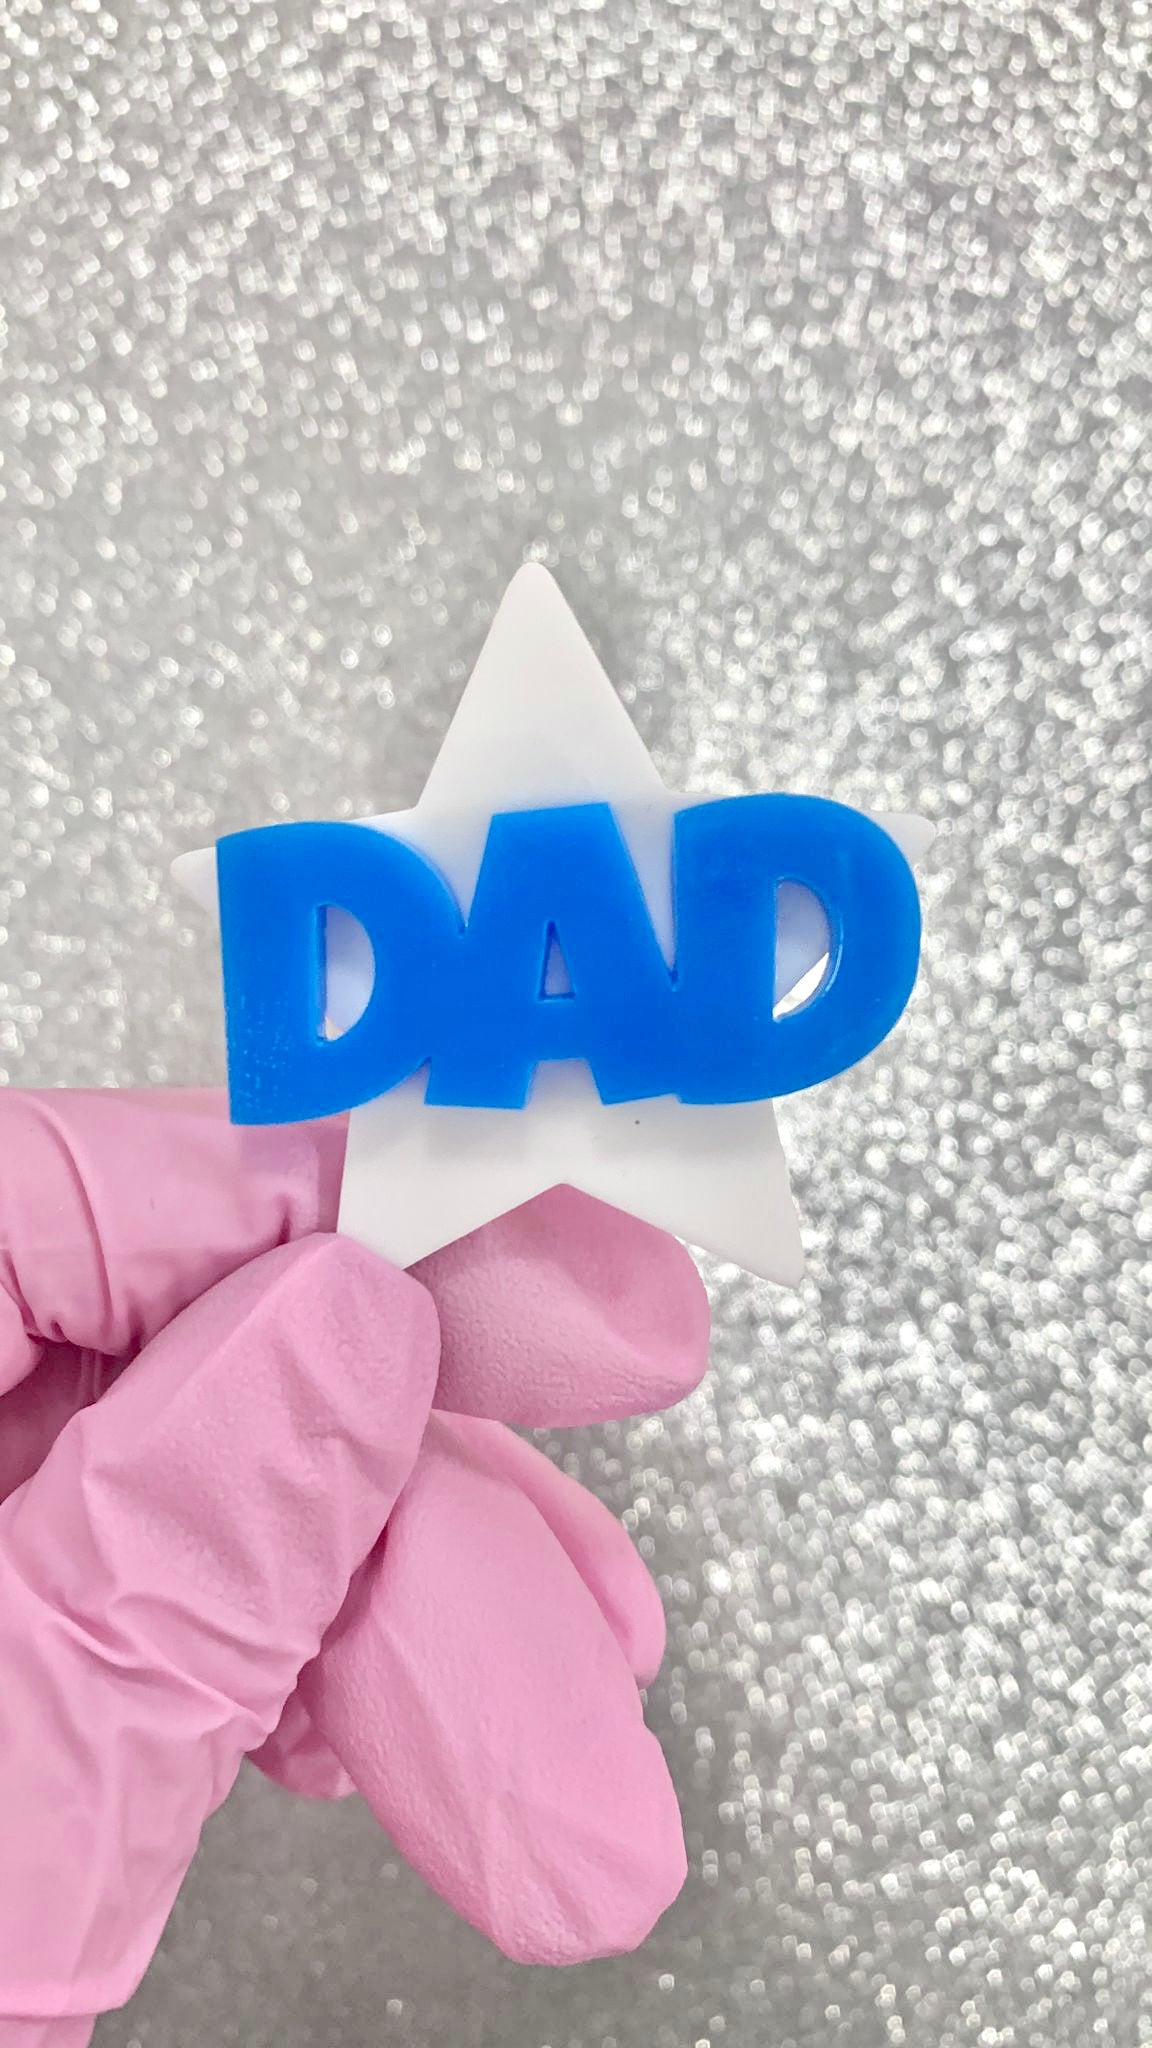 DAD STAR CHARM TOPPERS